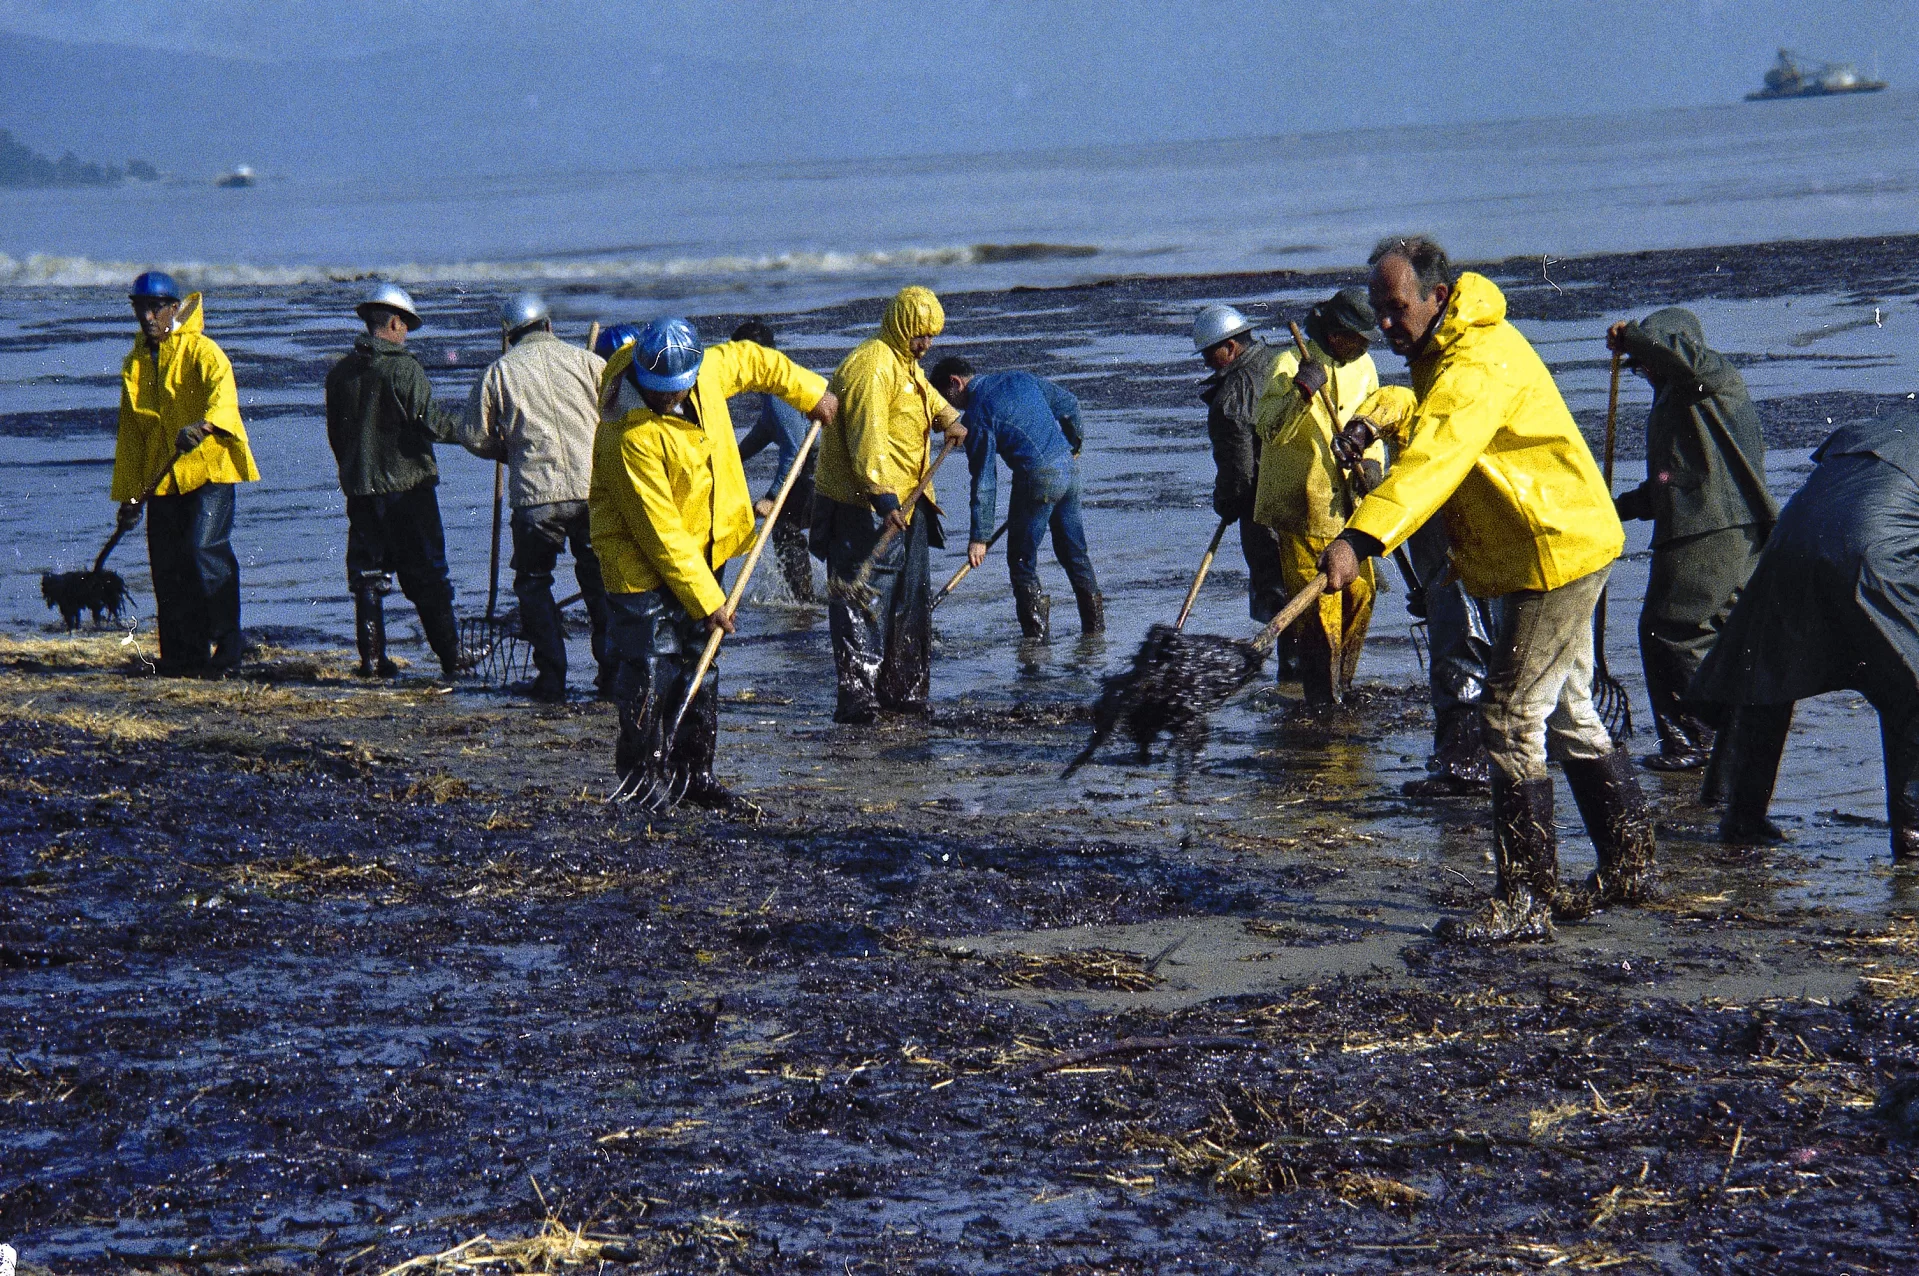 FILE - In this Feb. 6, 1969, file photo, state forestry conservation crews made up of prison convicts clean up oil-soaked straw on the beach in Santa Barbara, Calif.  From 1969 to 1980, Congress passed a wide range of environmental bills tackling air and water pollution, garbage, protections for fisheries and marine mammals, and endangered species; in 1990 Congress tackled acid rain by overhauling the Clean Air Act. Now in the week of April 20, 2009, lawmakers begin hearings on an energy and global warming bill that could revolutionize how the country produces and uses energy, and could for the first time reduce the pollution responsible for heating up the planet.  (AP Photo/Wally Fong, FILE)